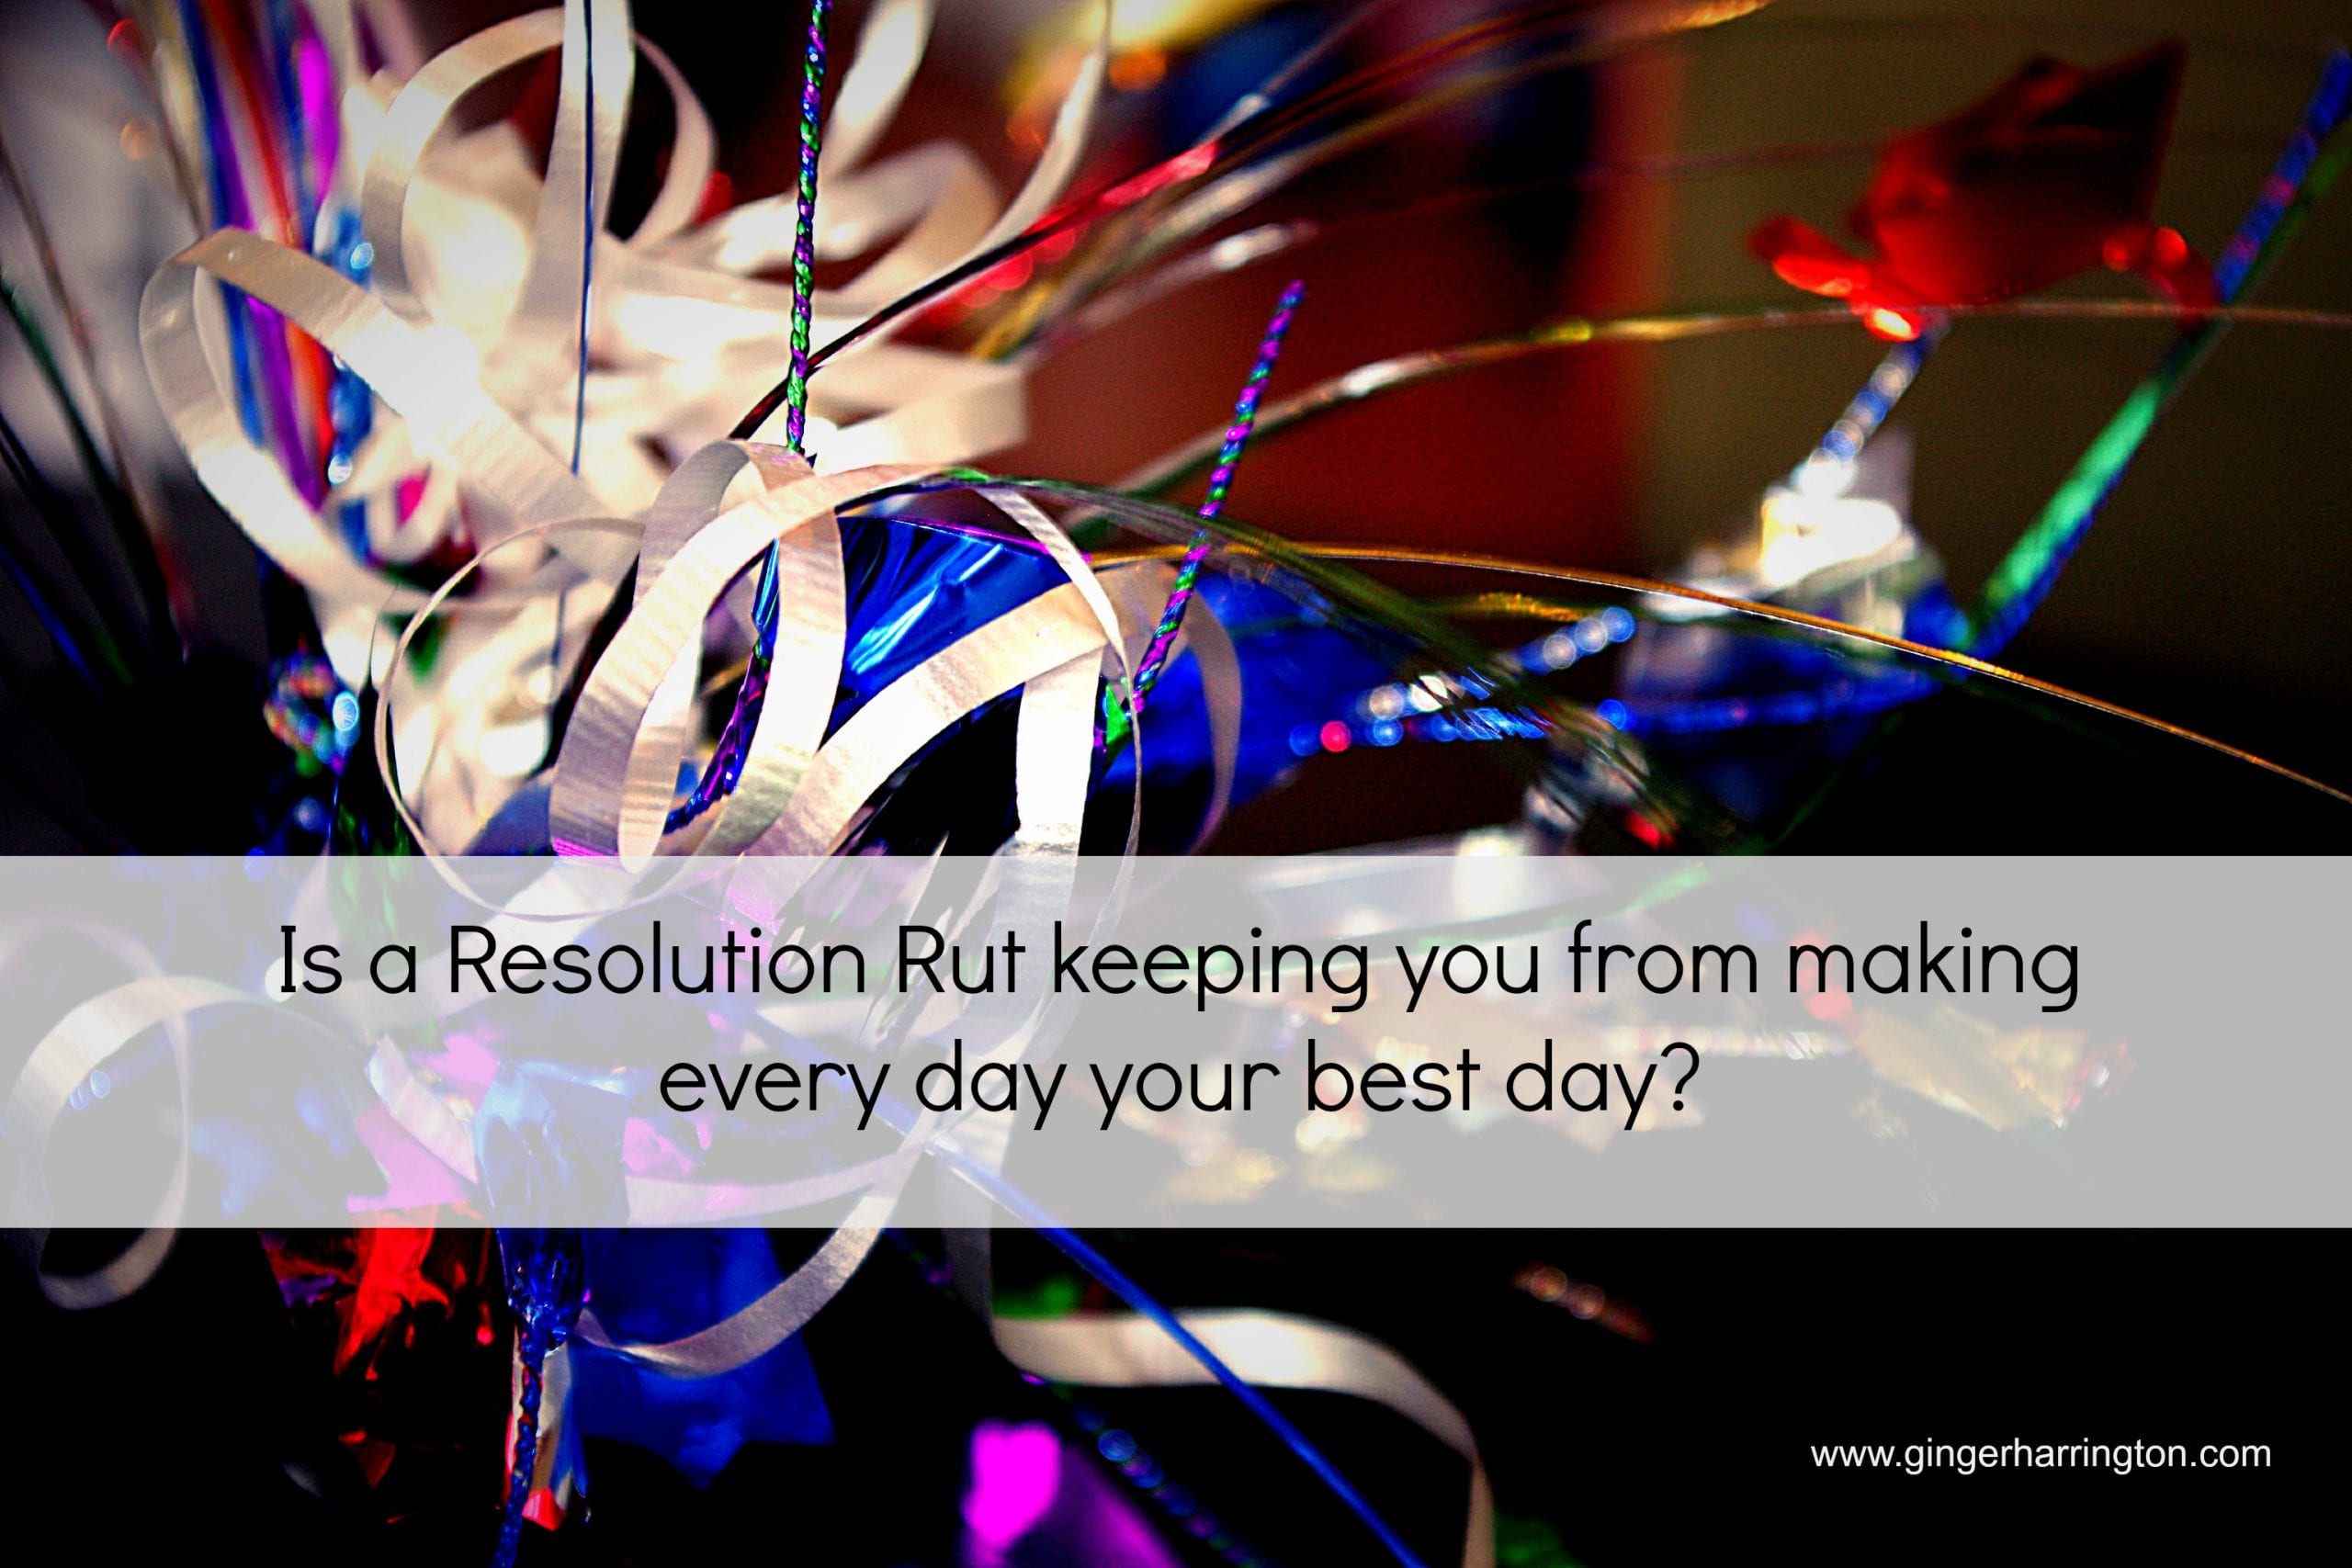 Two Common Resolution Ruts that Could be Holding You Back